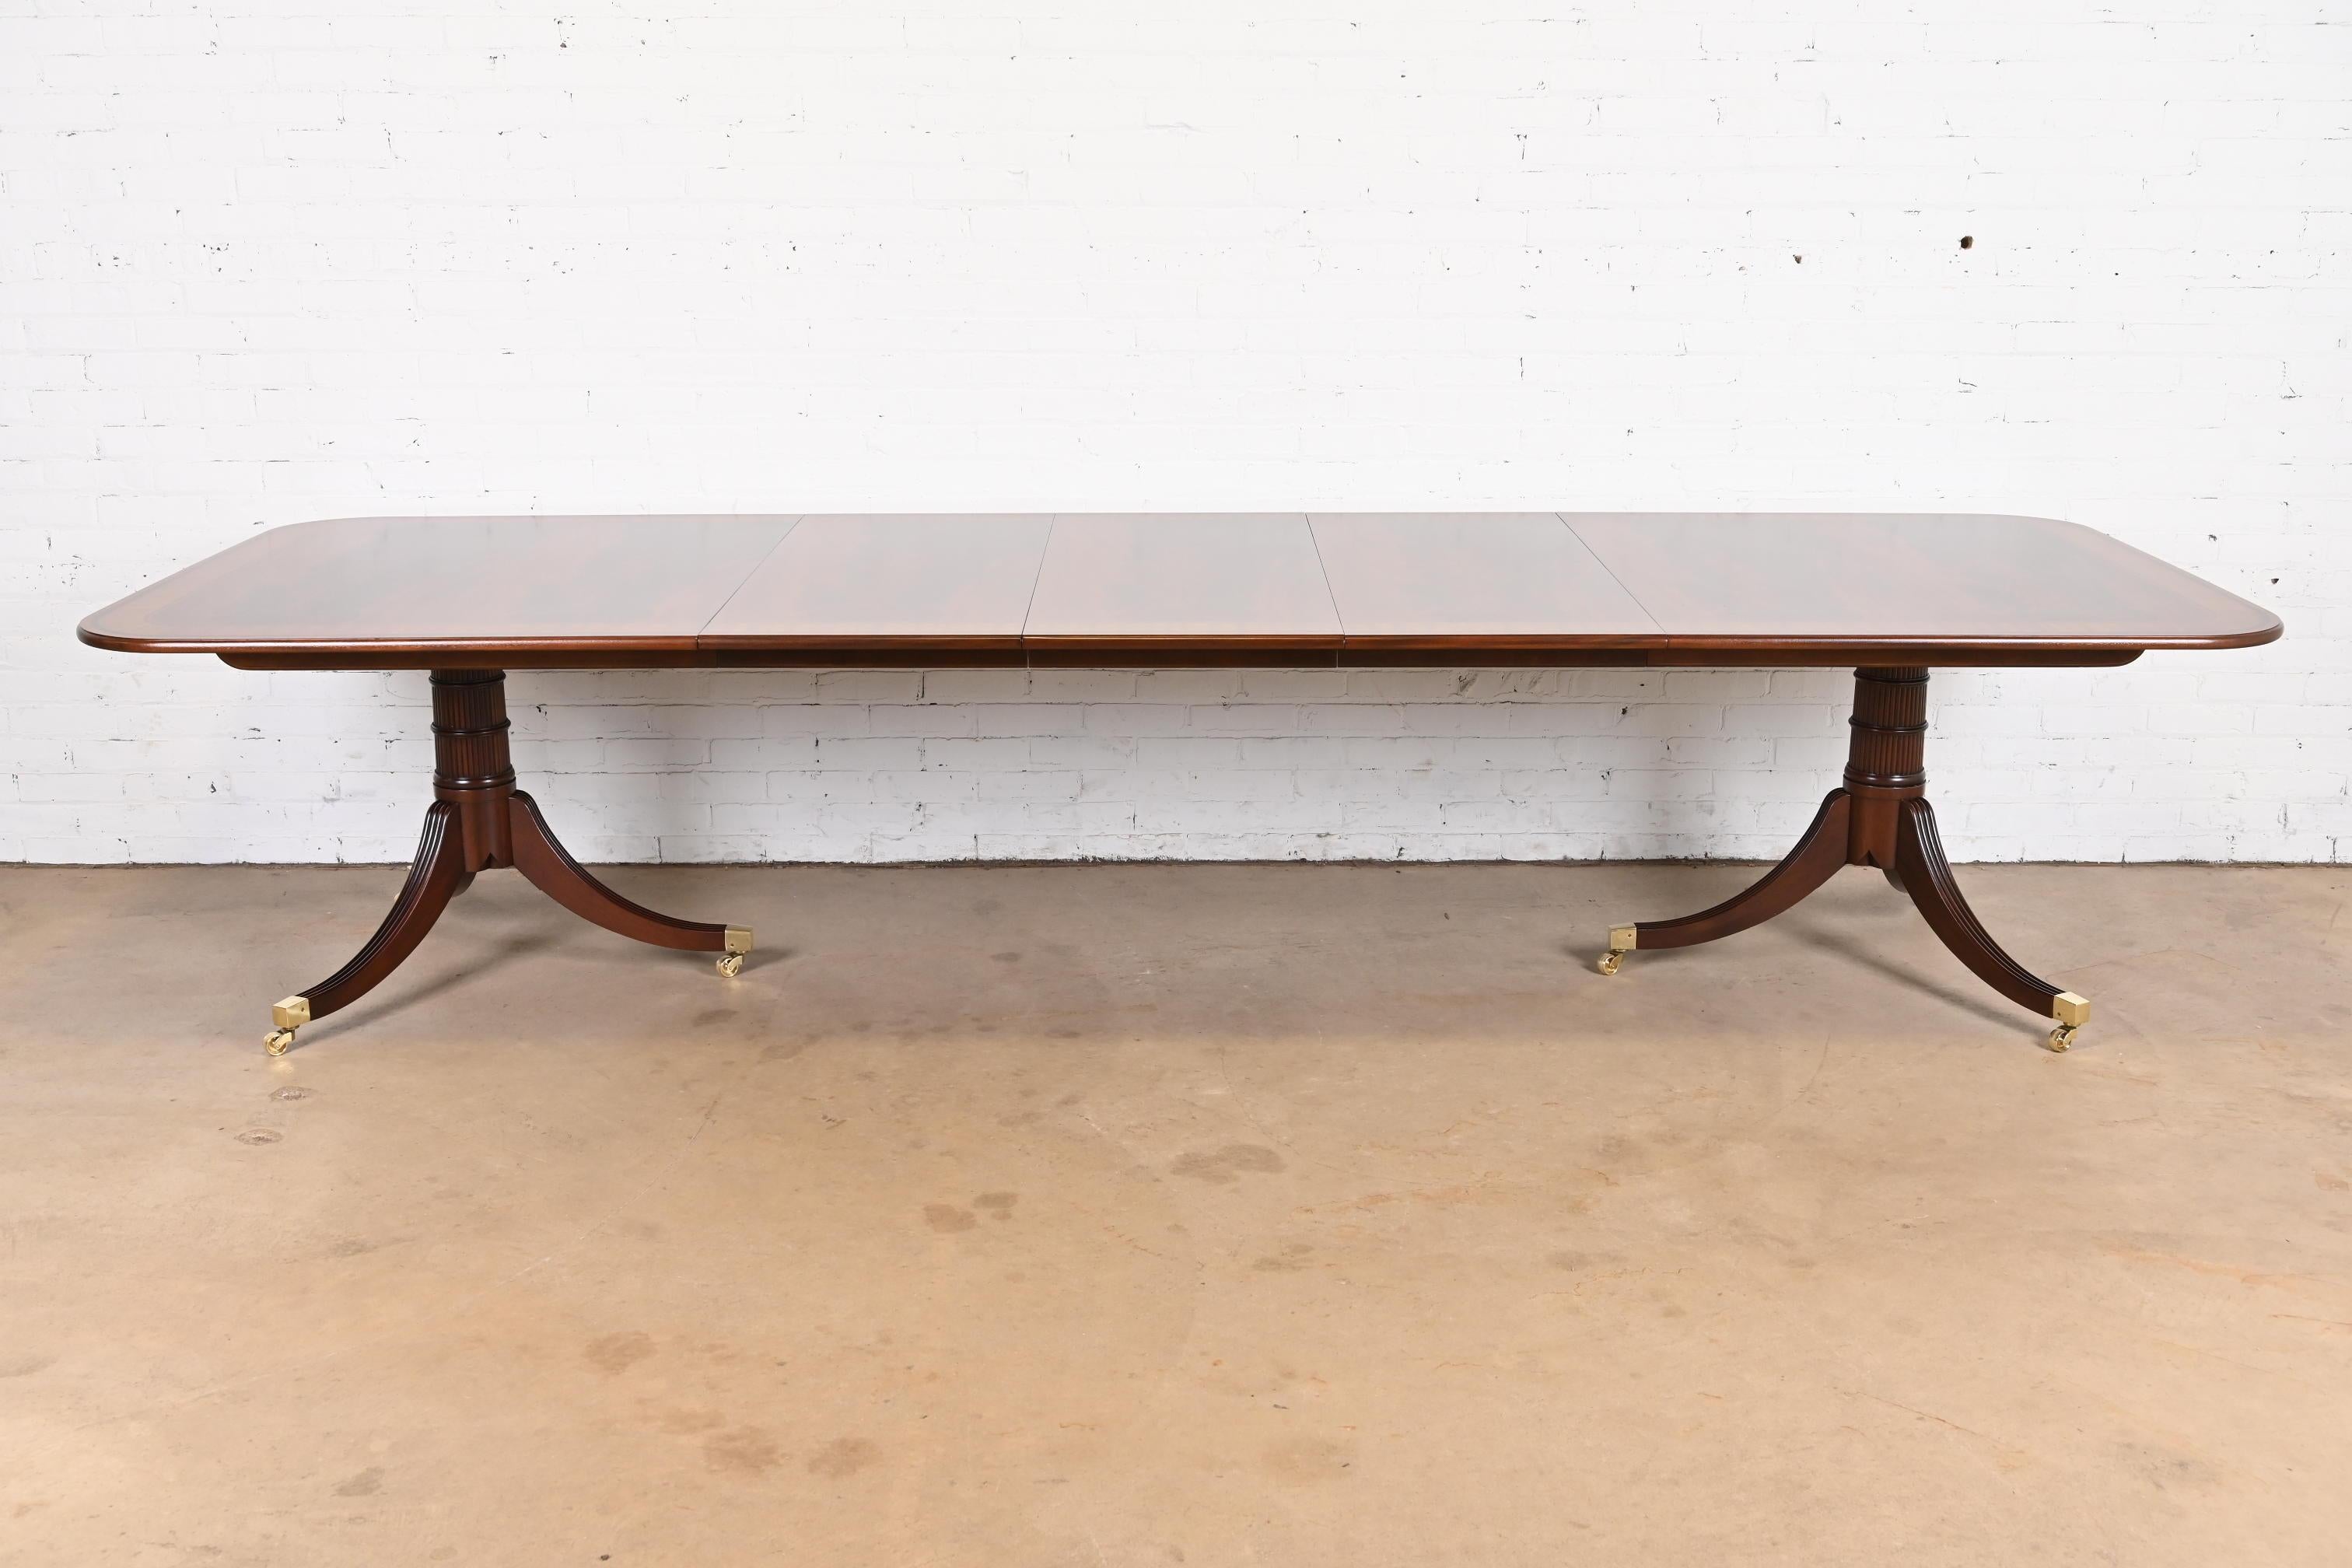 A rare and outstanding Georgian or Regency style double pedestal extension dining table

By Baker Furniture, 